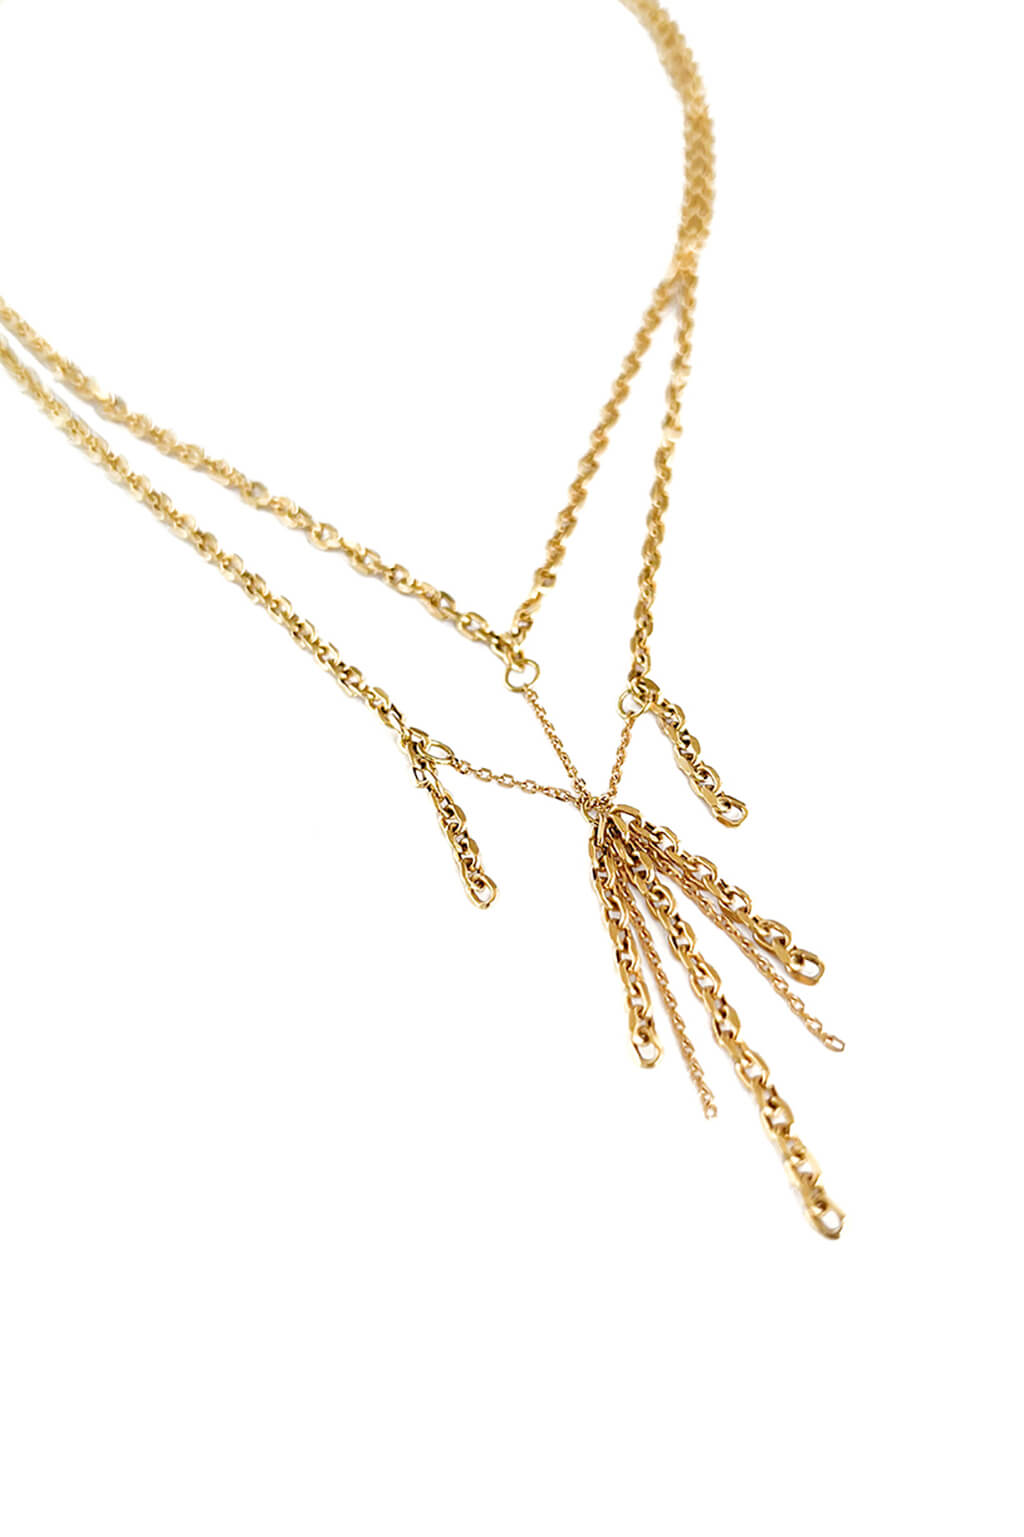 Loose ends gold necklace